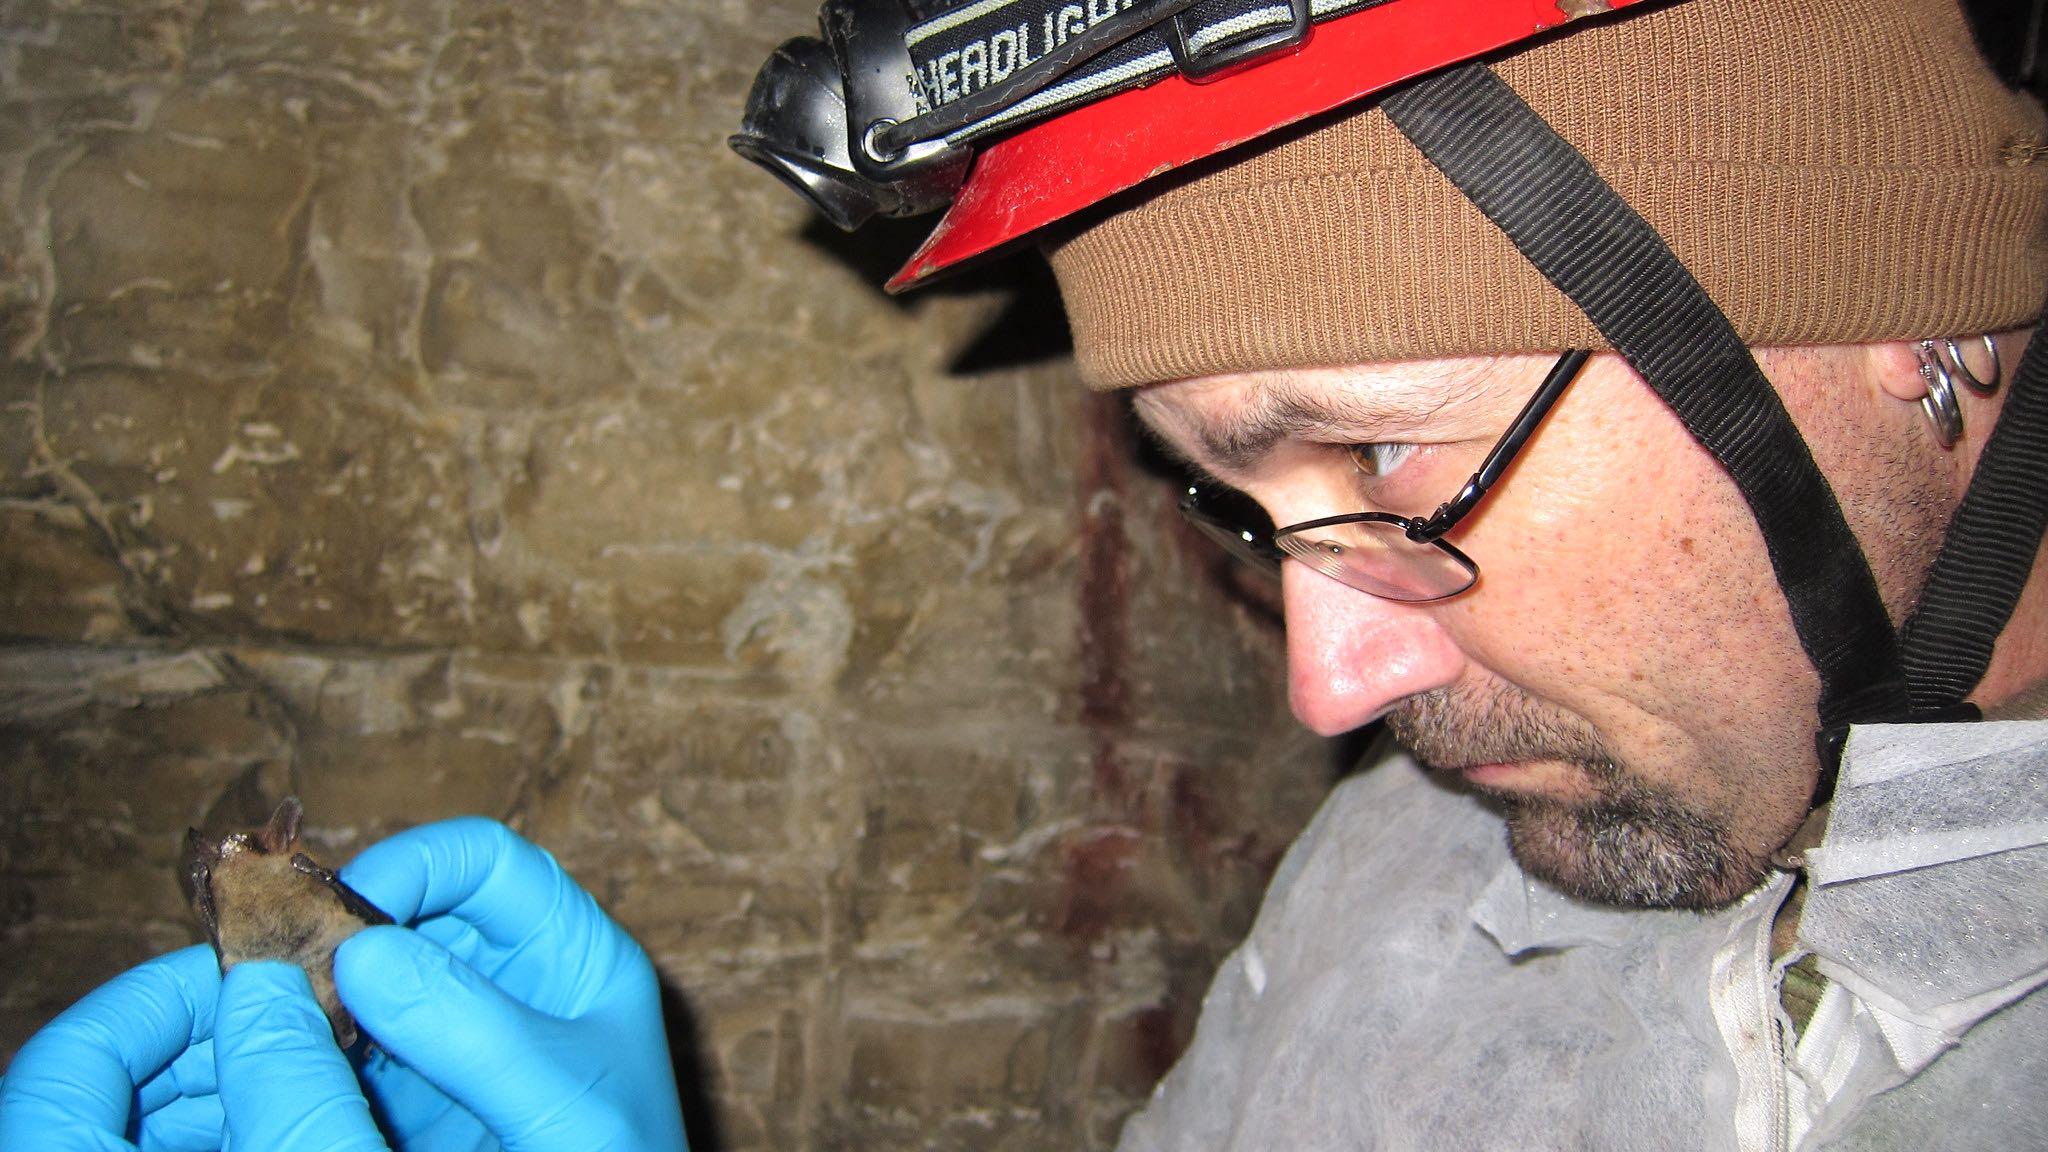 A biologist with the Illinois Department of Natural Resources examines a northern long-eared bat with telltale signs of white-nose syndrome, Found in 2013 in LaSalle County. (University of Illinois / Steve Taylor)